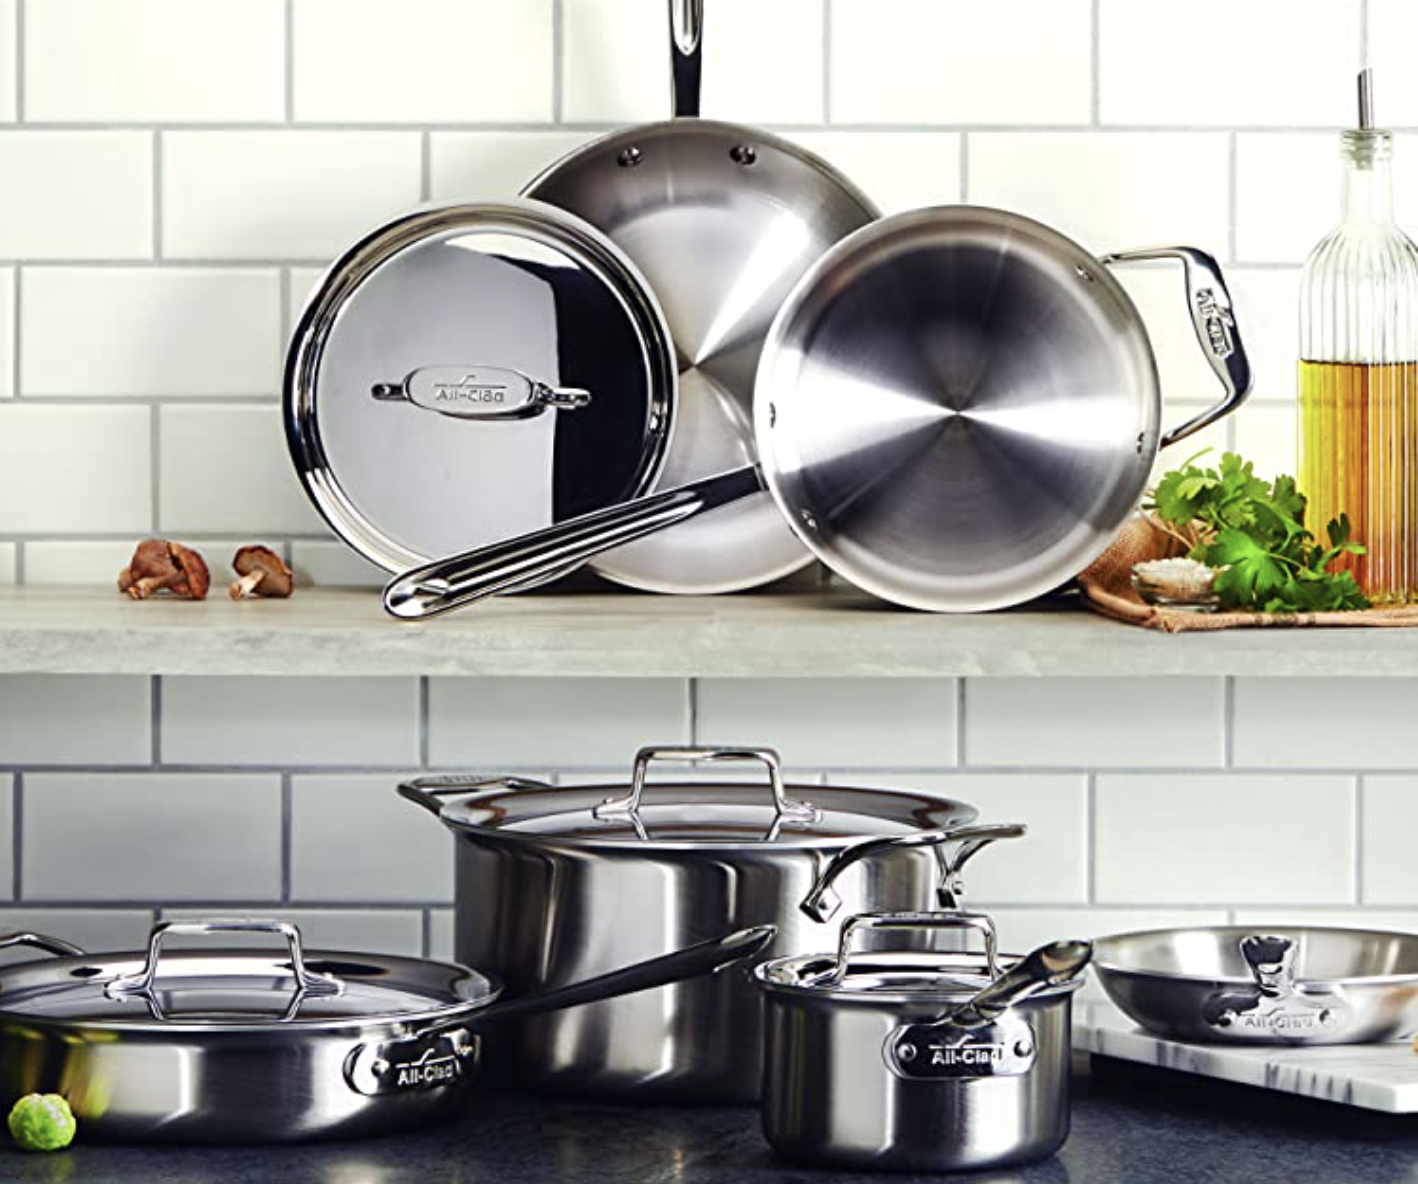 All-Clad D3 Stainless Steel 10 Piece Cookware Set - Kitchen & Company